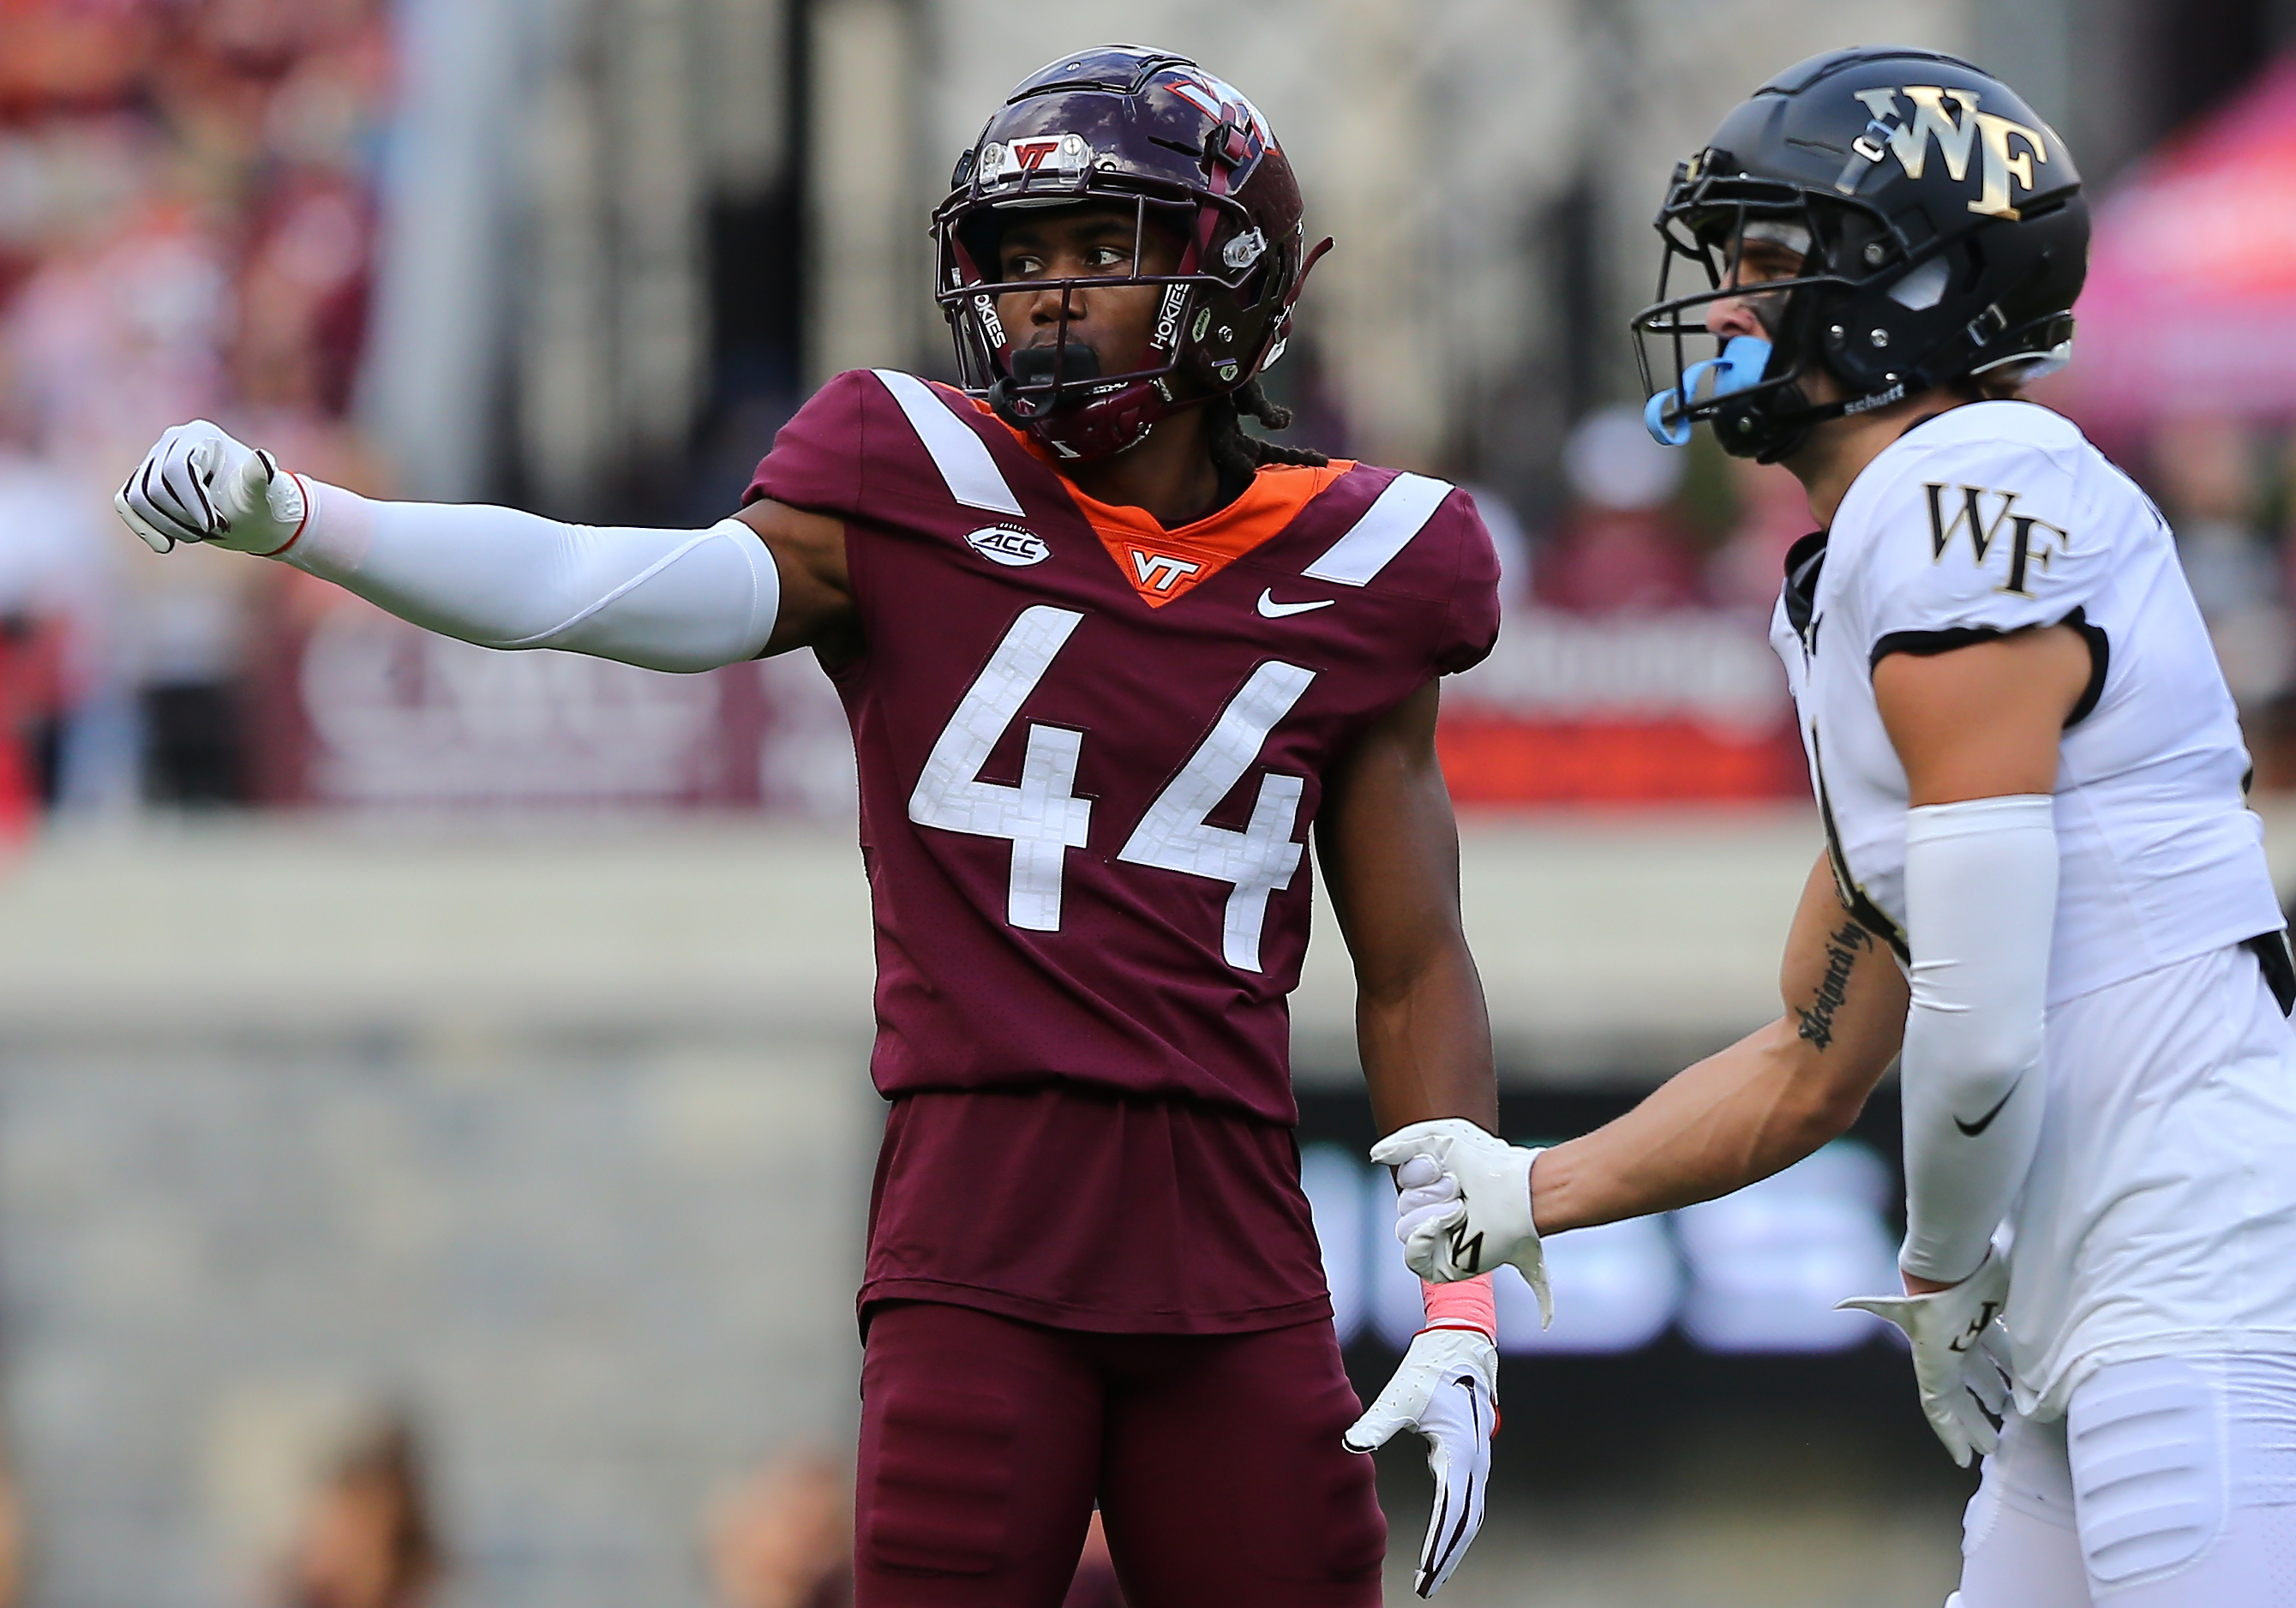 COLLEGE FOOTBALL: OCT 14 Wake Forest at Virginia Tech